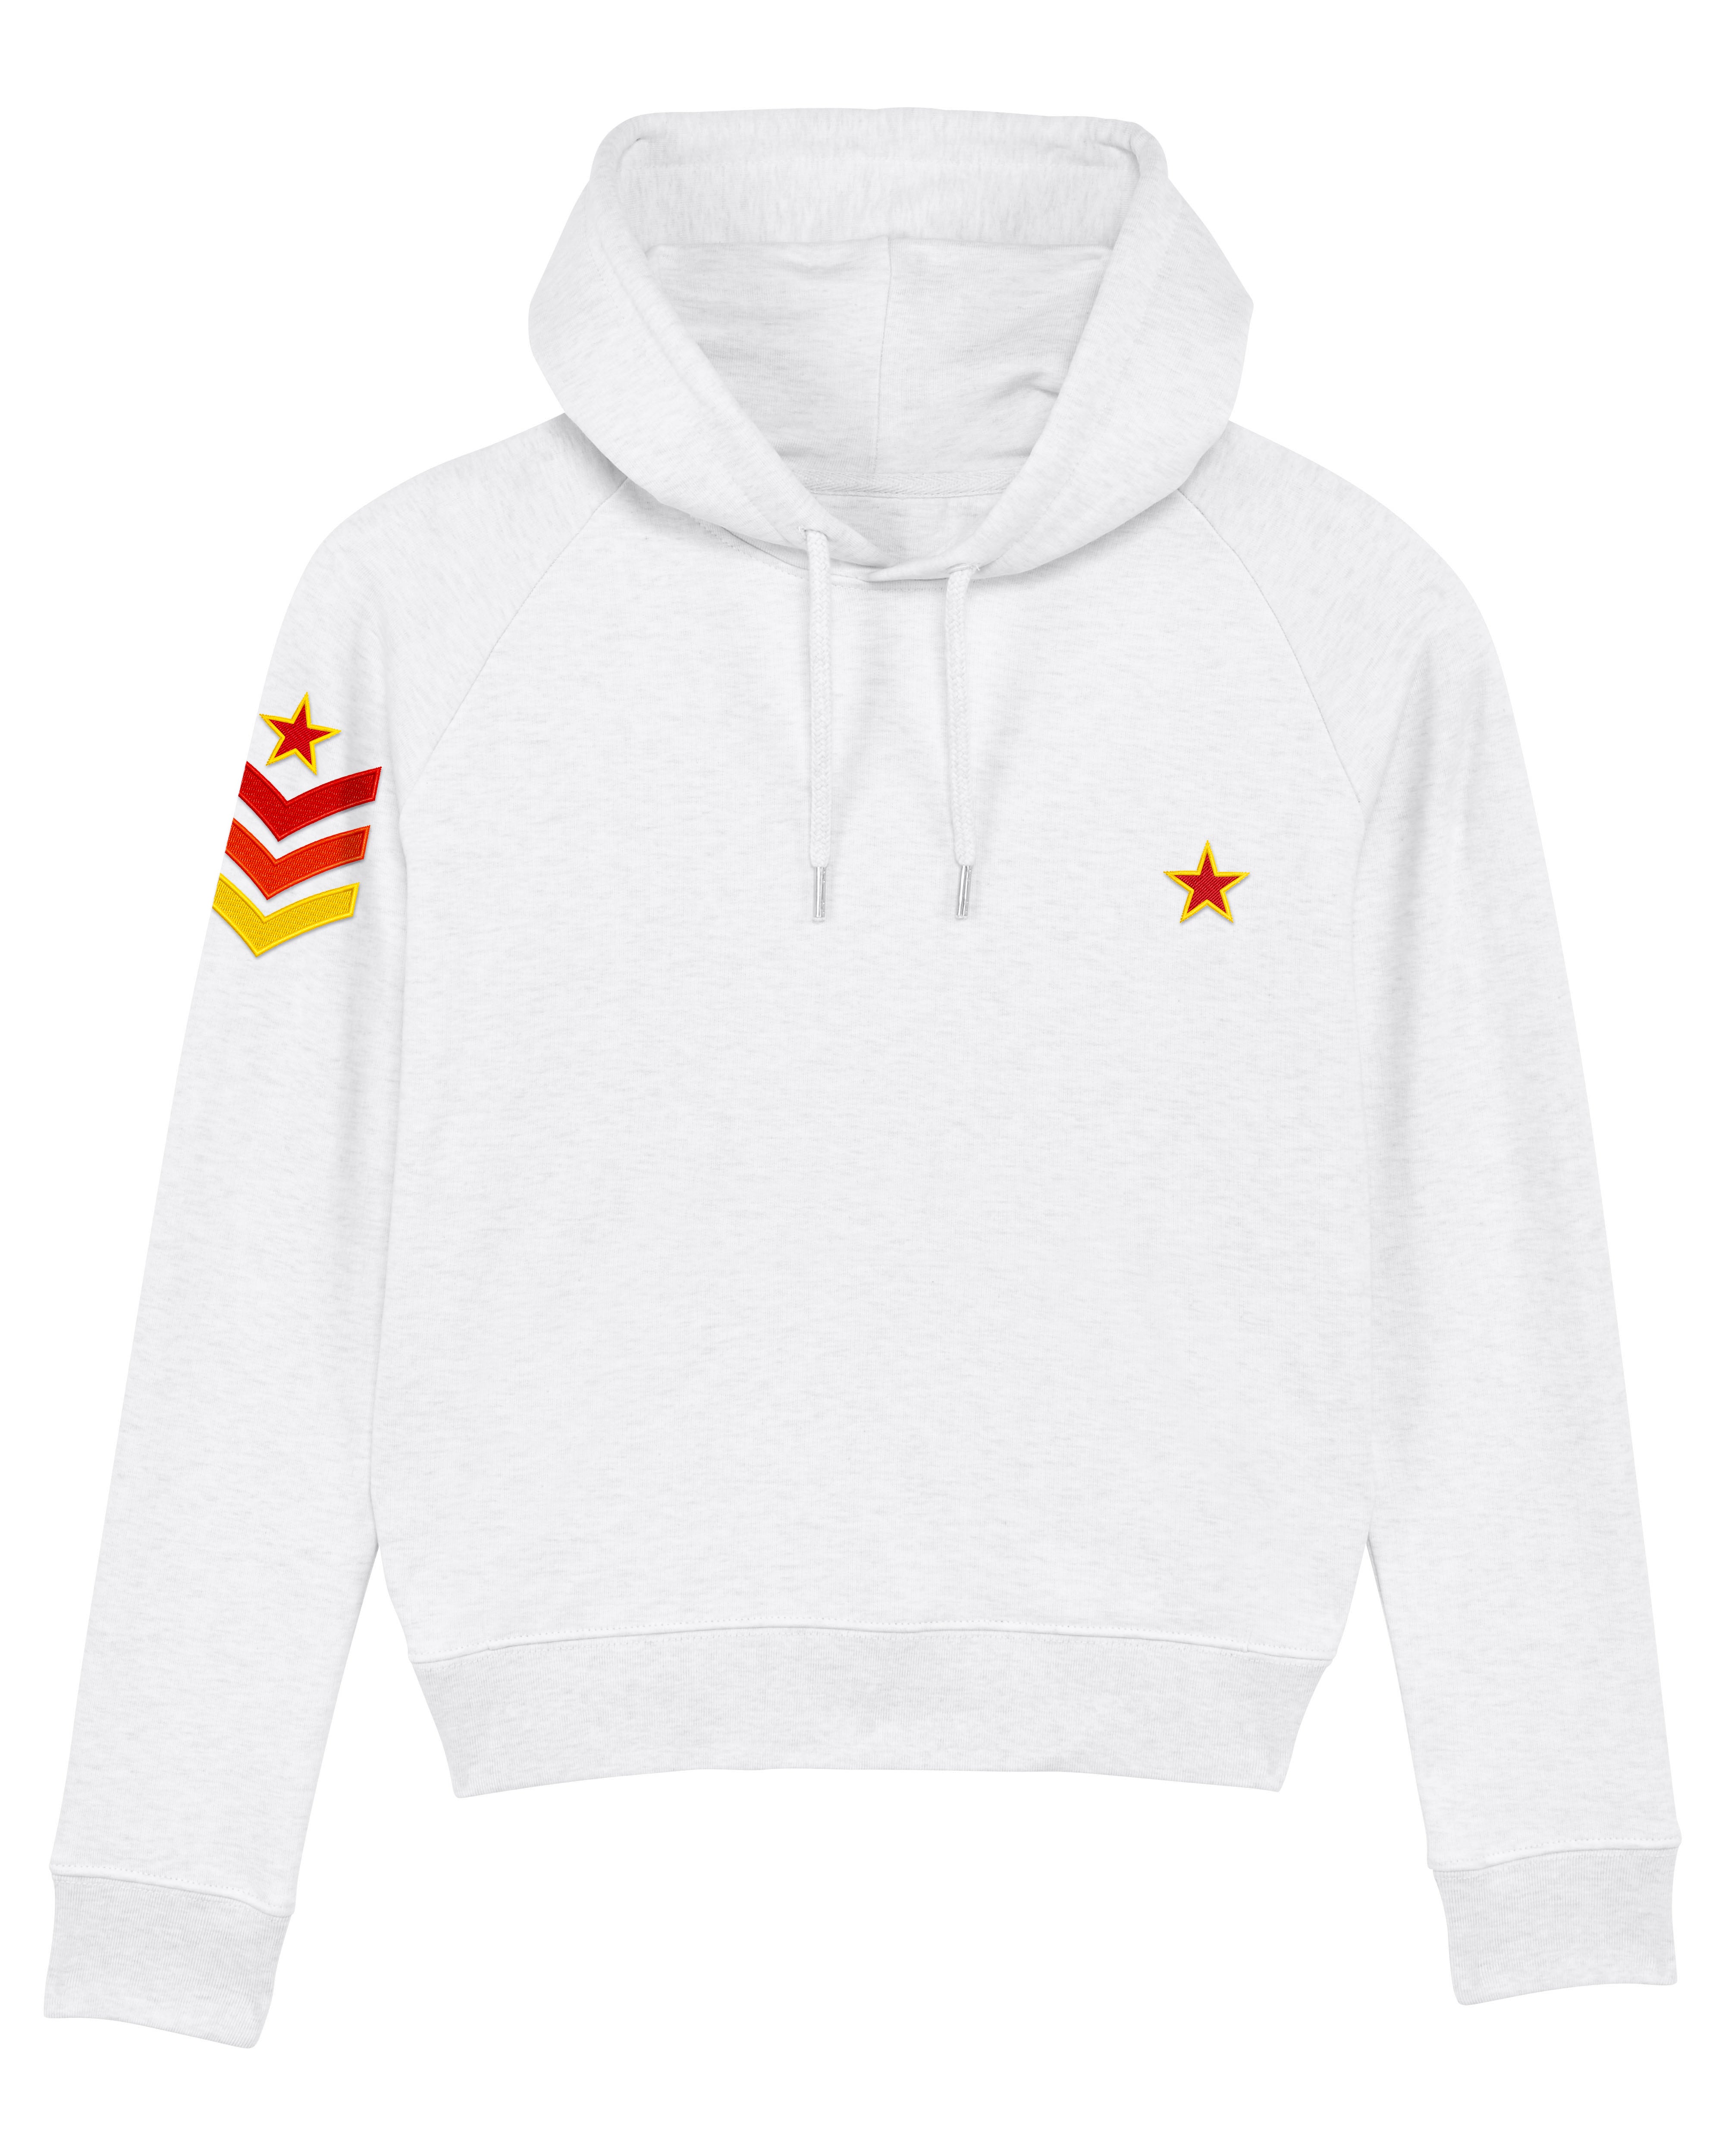 White Military Style Hoodie - MADE TO ORDER